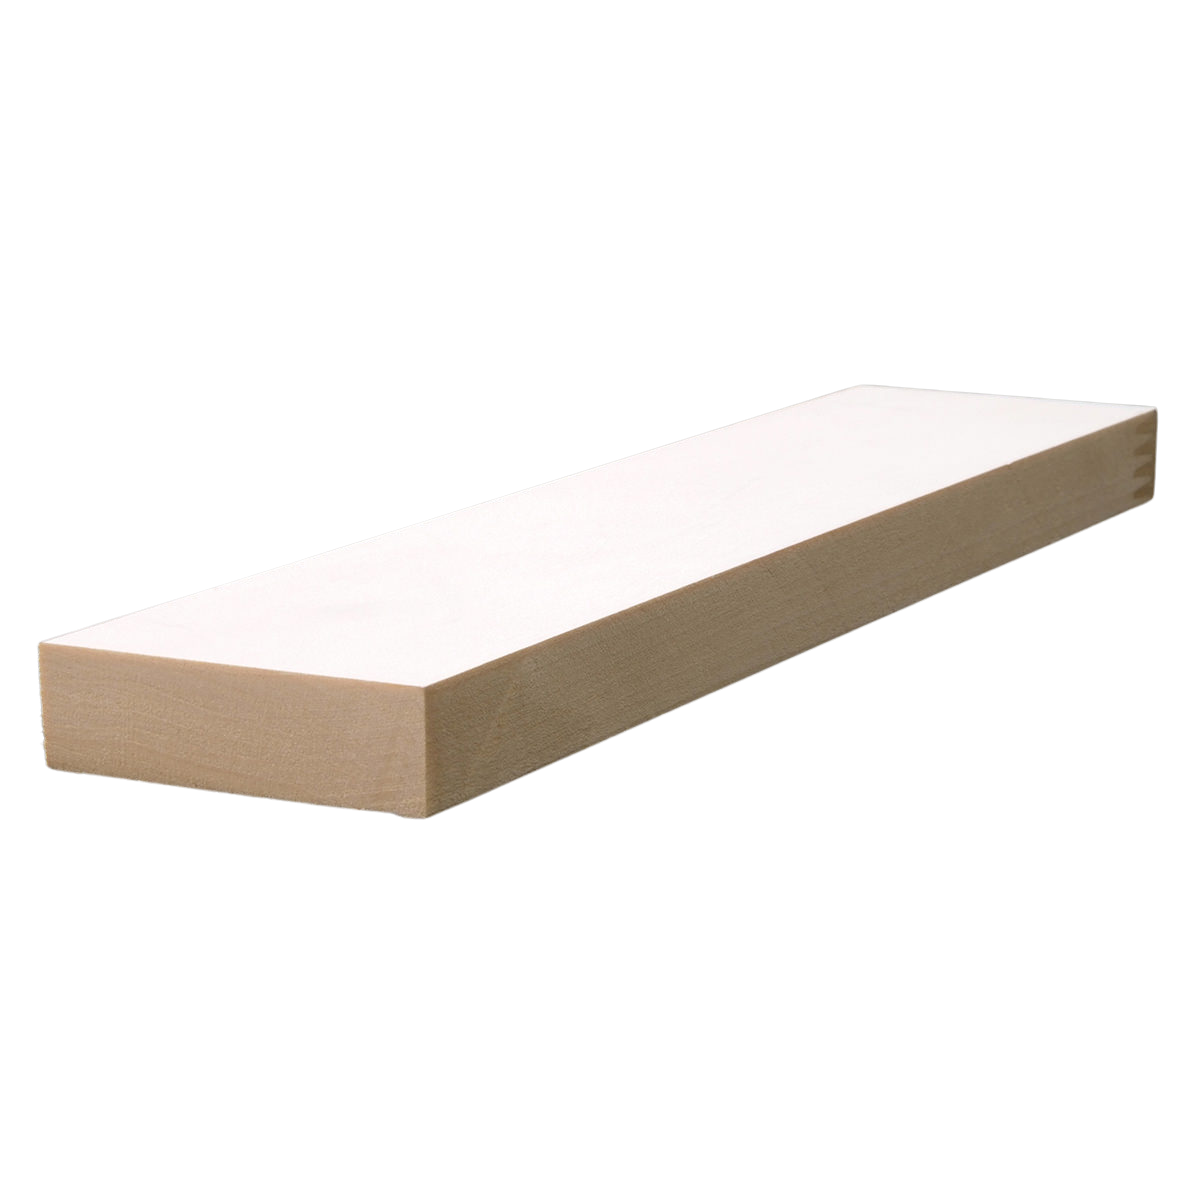 3/4" x 2-1/2" Finger Jointed Pine Primed Surfaced Four Sides Moulding, by Linear Foot